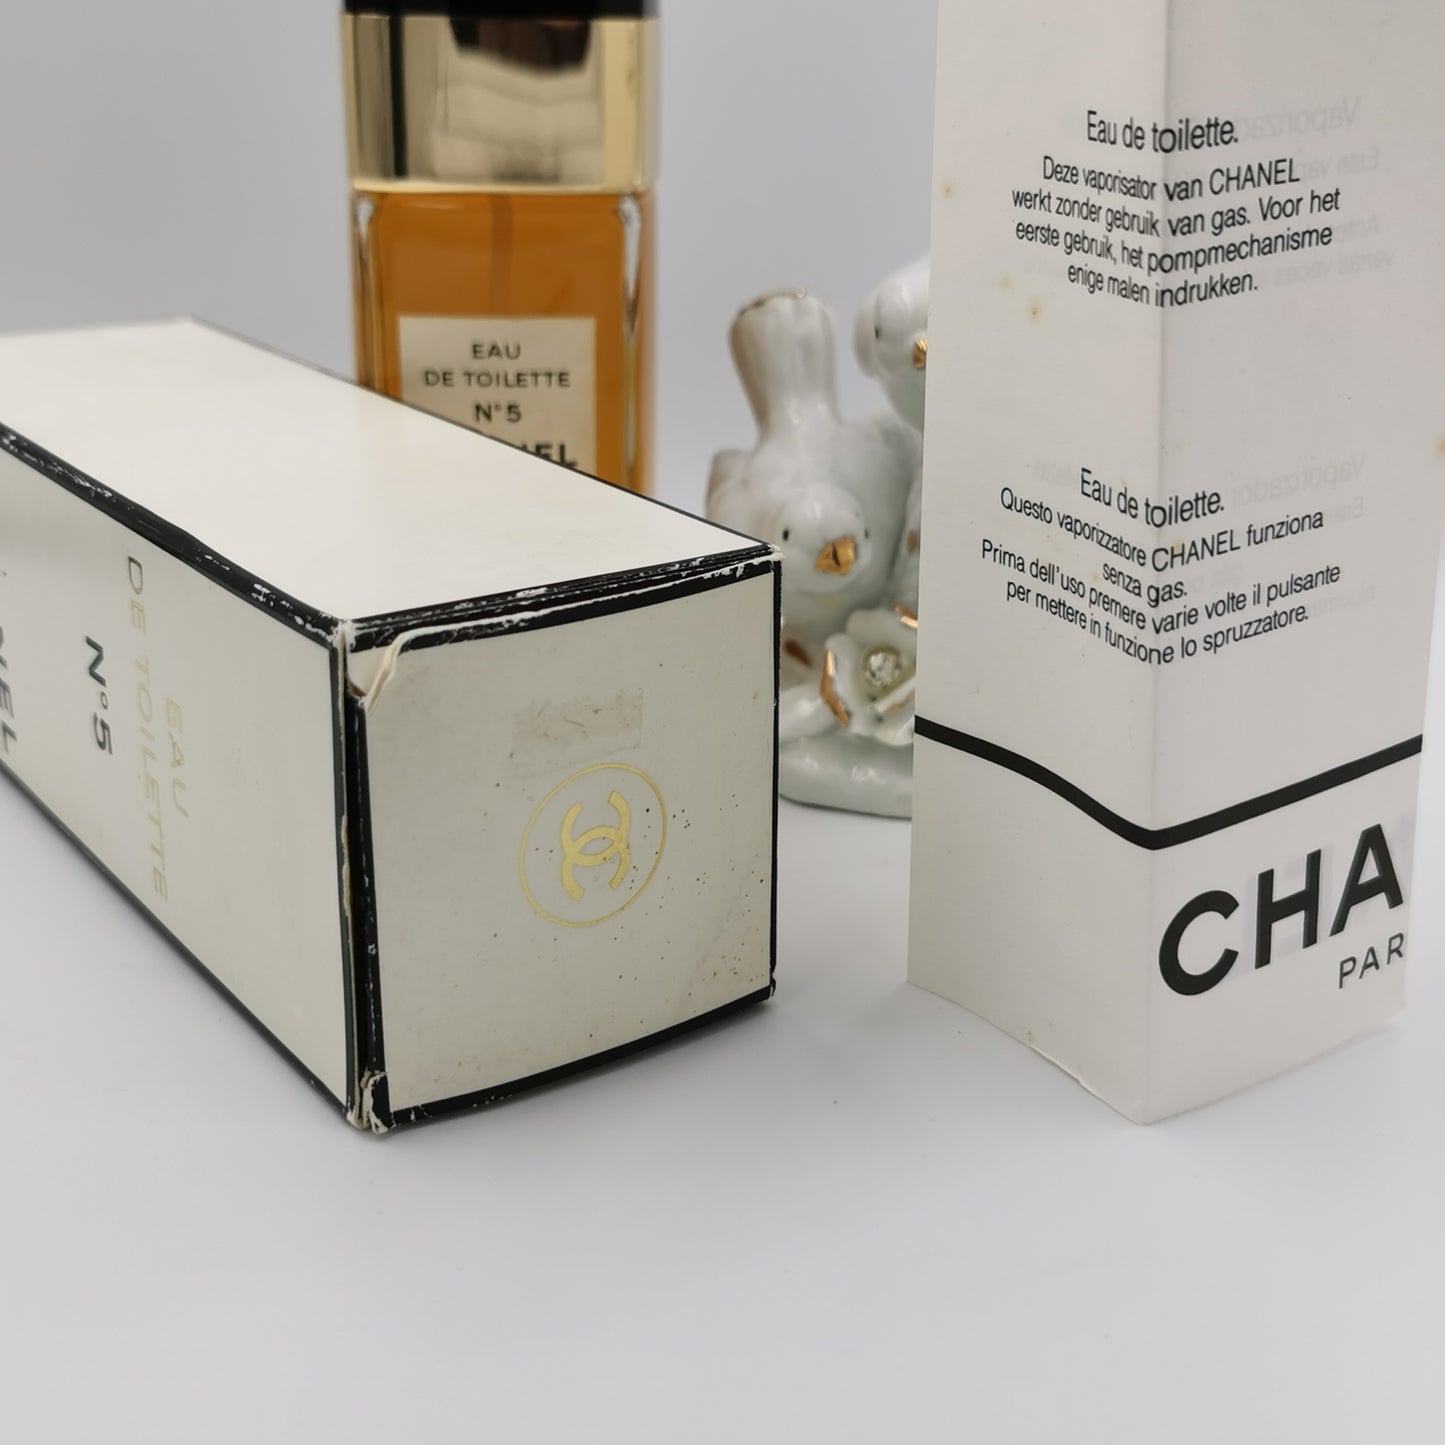 Chanel No5 by Chanel 100ml EDT Spray VINTAGE